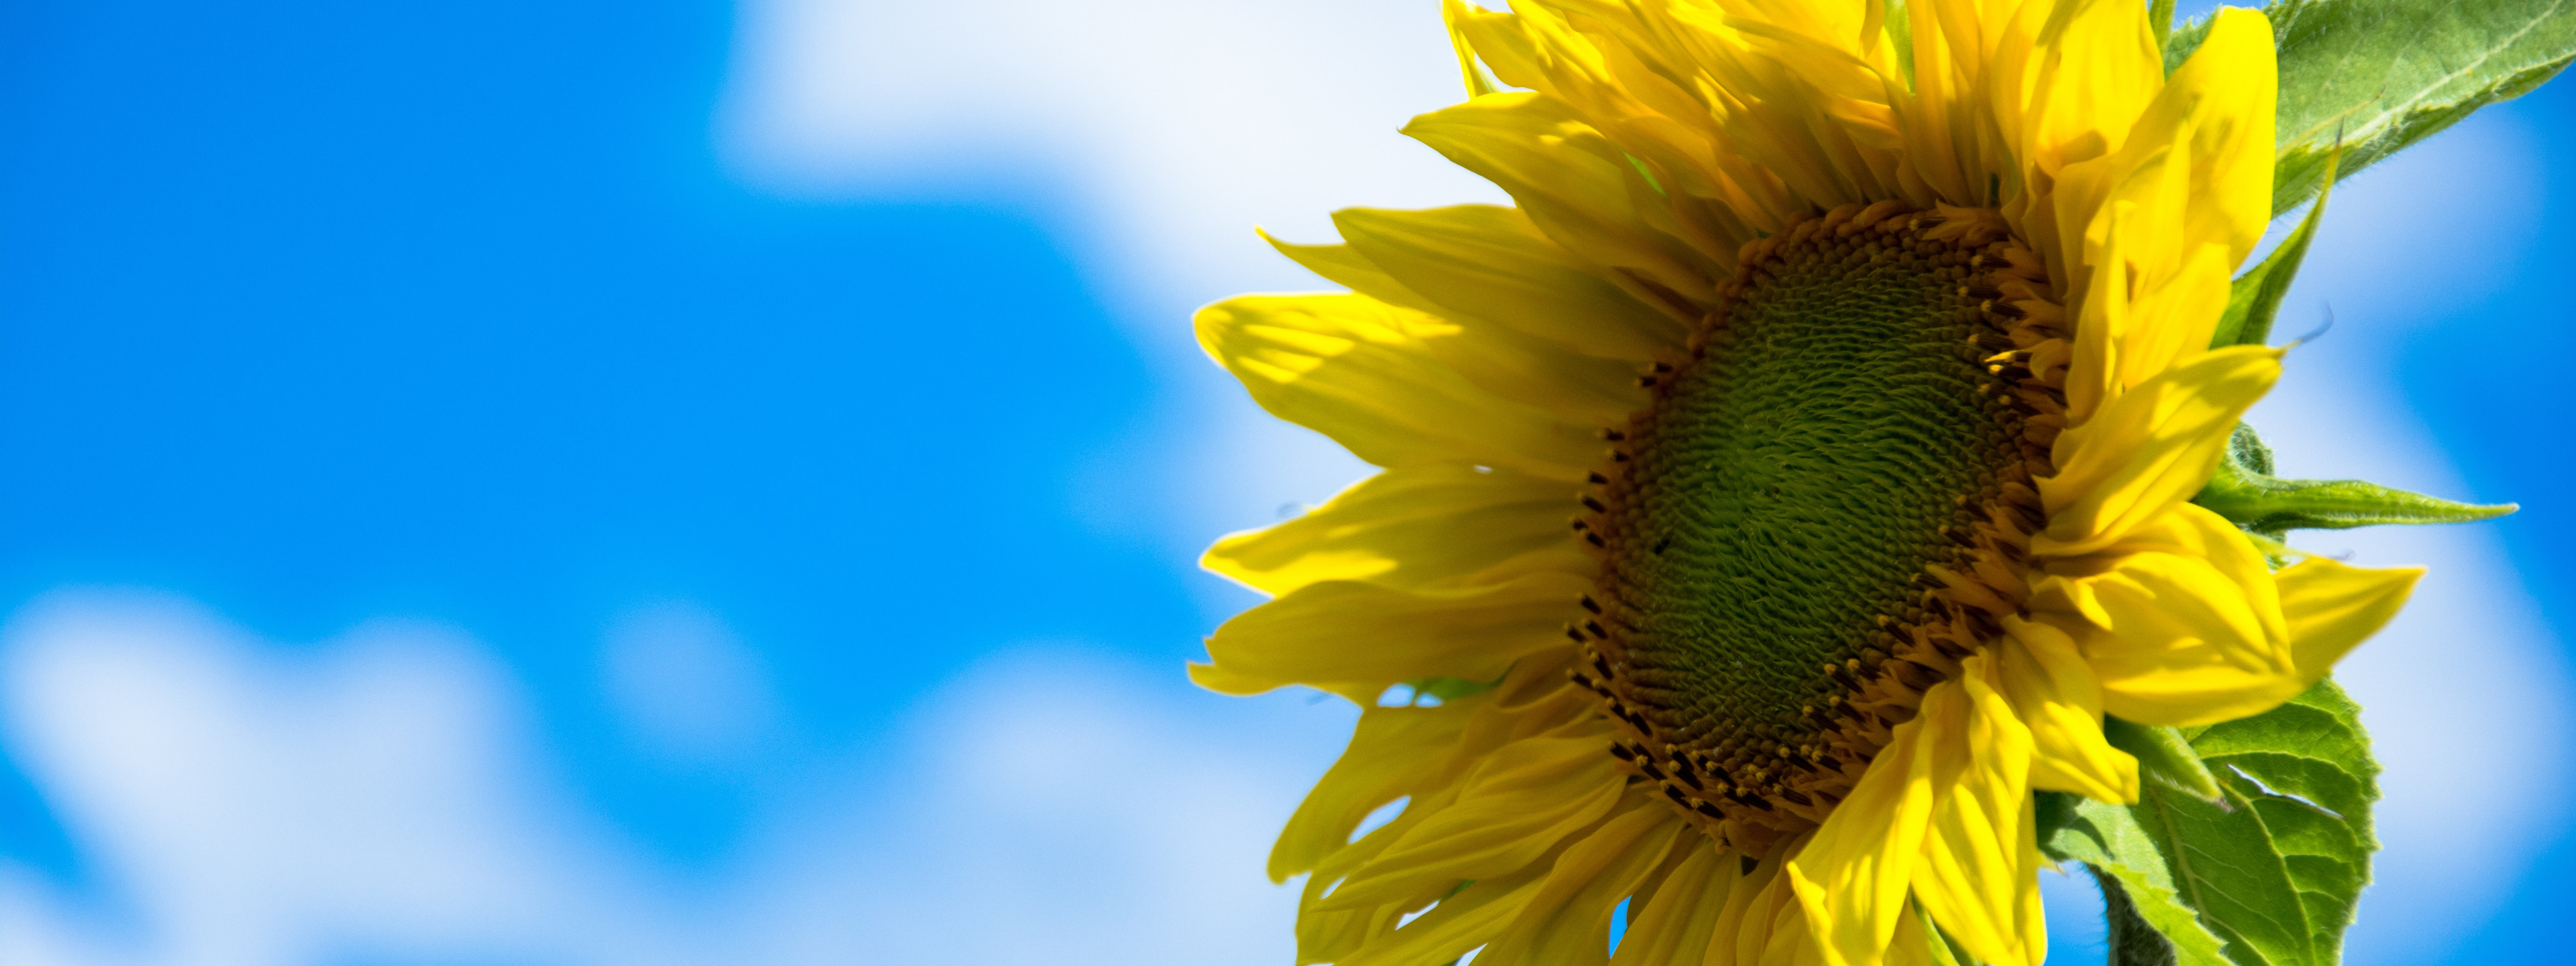 Download wallpaper the sky, yellow, sunflower, blue, seed, section nature i...